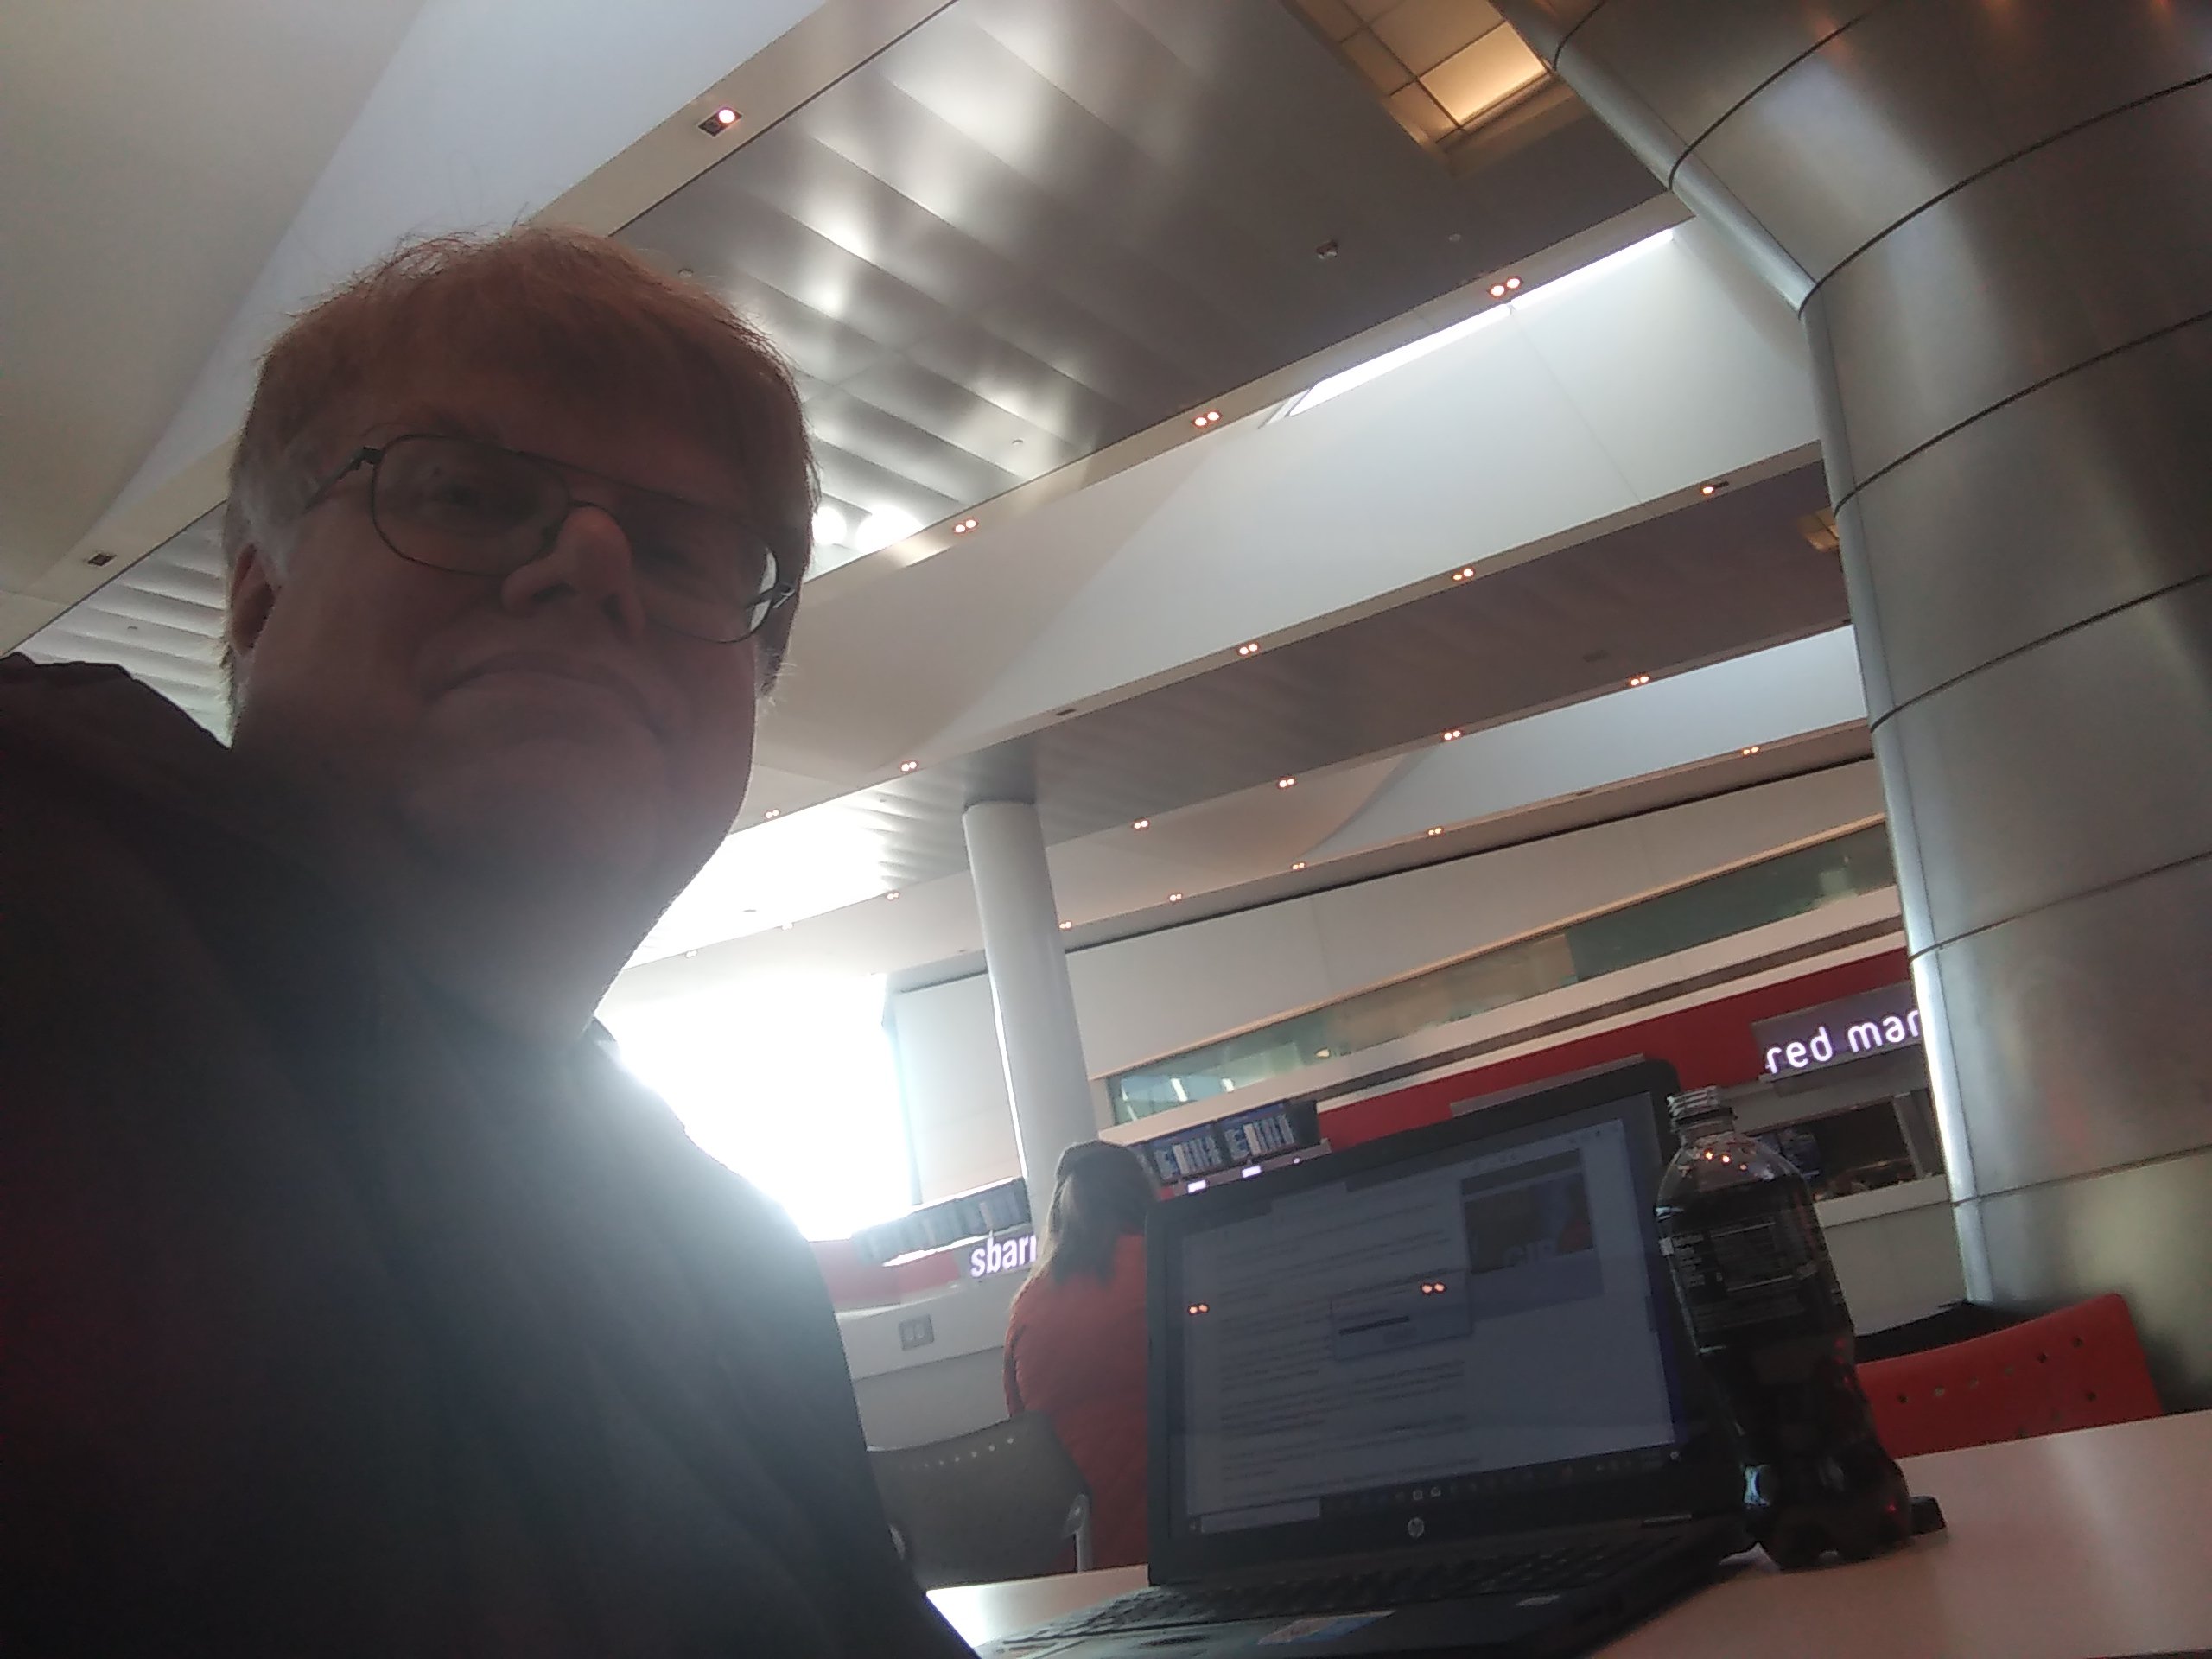 Confronted by a long wait at Philadelphia International Airport, Lee Groves - also known as "The Travelin' Man" - sets up shop following a relaxing meal at the food court.